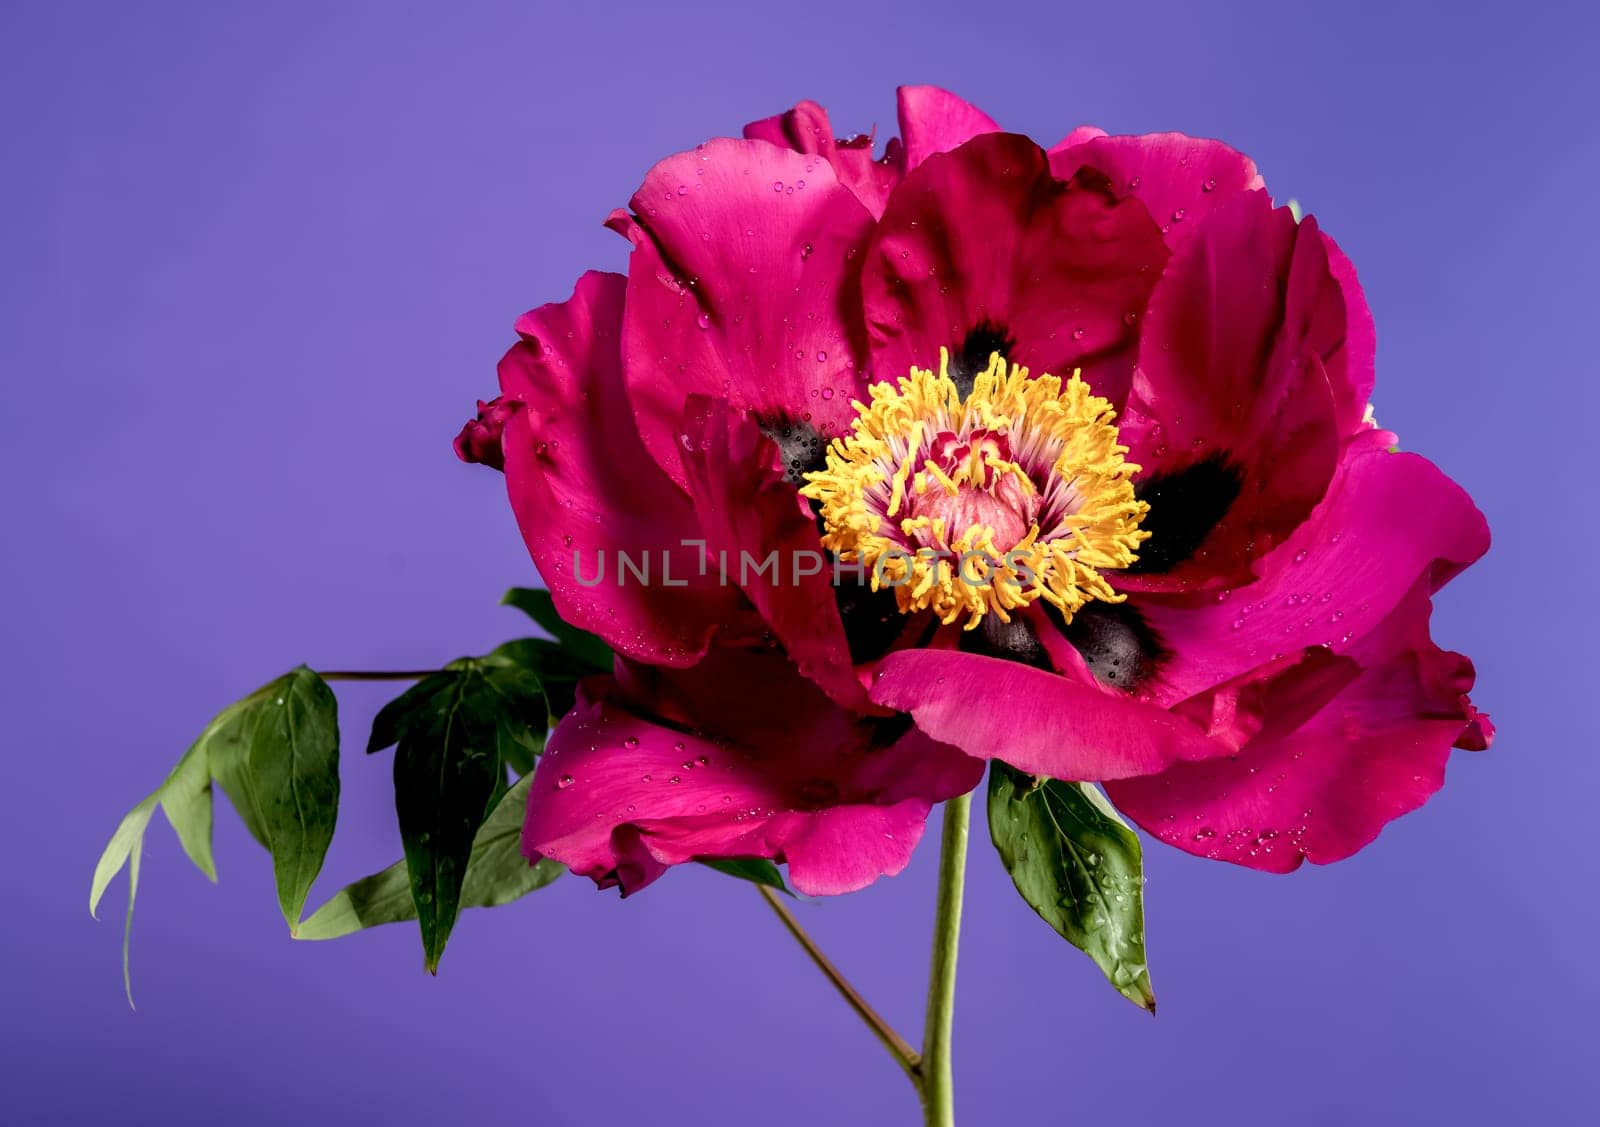 Beautiful Blooming red peony on a purple background. Flower head close-up.